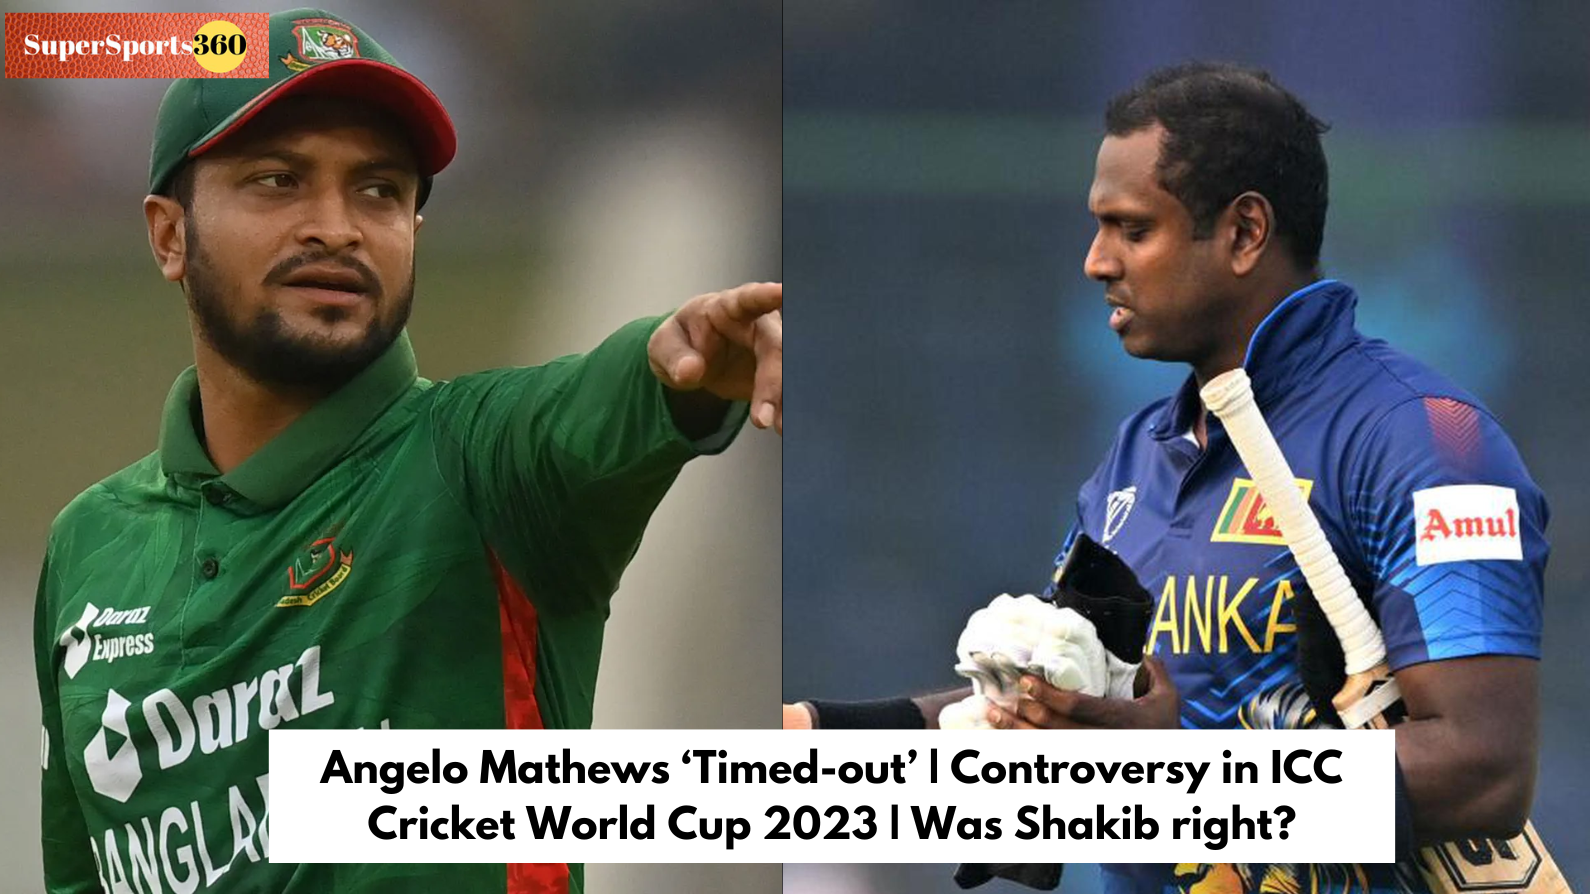 Angelo Mathews ‘Timed-out’ | Controversy in ICC Cricket World Cup 2023 | Was Shakib right?